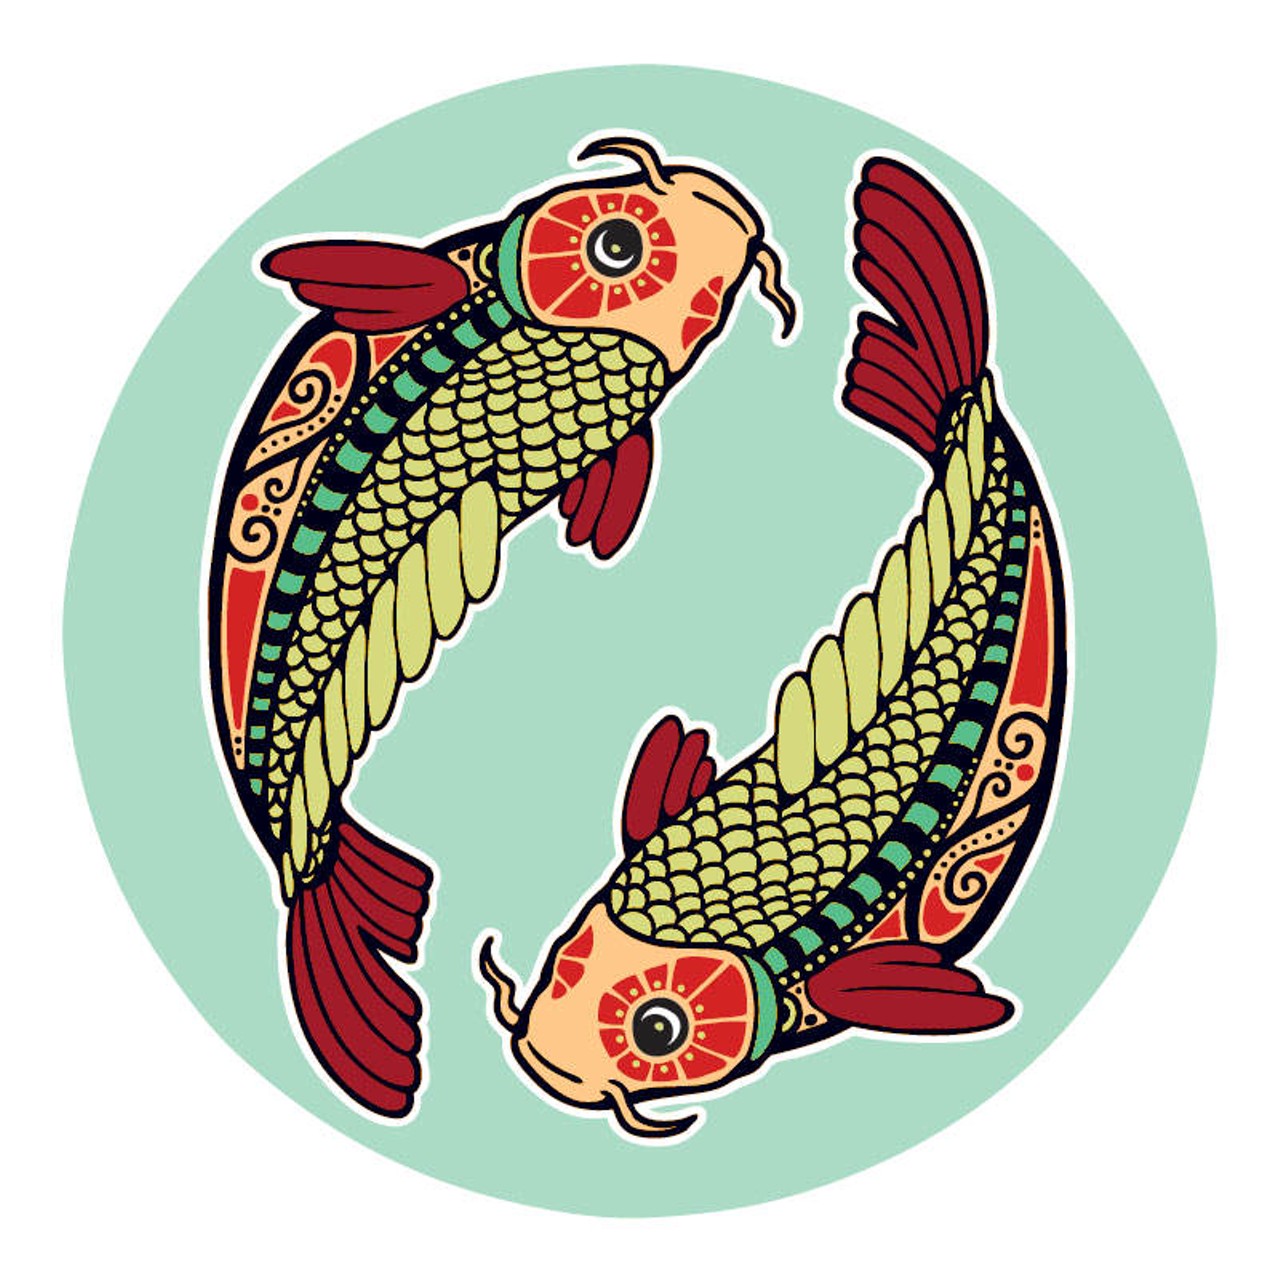 PISCES: February 21 &#150; March 20
The next phase of your story is about healing. Your life has been tied up in knots. The sense of relief from pain and pressure is what this is all about. Whether you're aware of it or not, the issues of a lifetime are leaking through the cracks, just in time to release you from the fear of being overtaken by what you can't control. Calm down. This is one of those times when walking your talk involves getting out of your head and putting your feet on the ground. Others are there, as much as possible. In the end, this all comes down to you, and to what your heart is telling you to do.